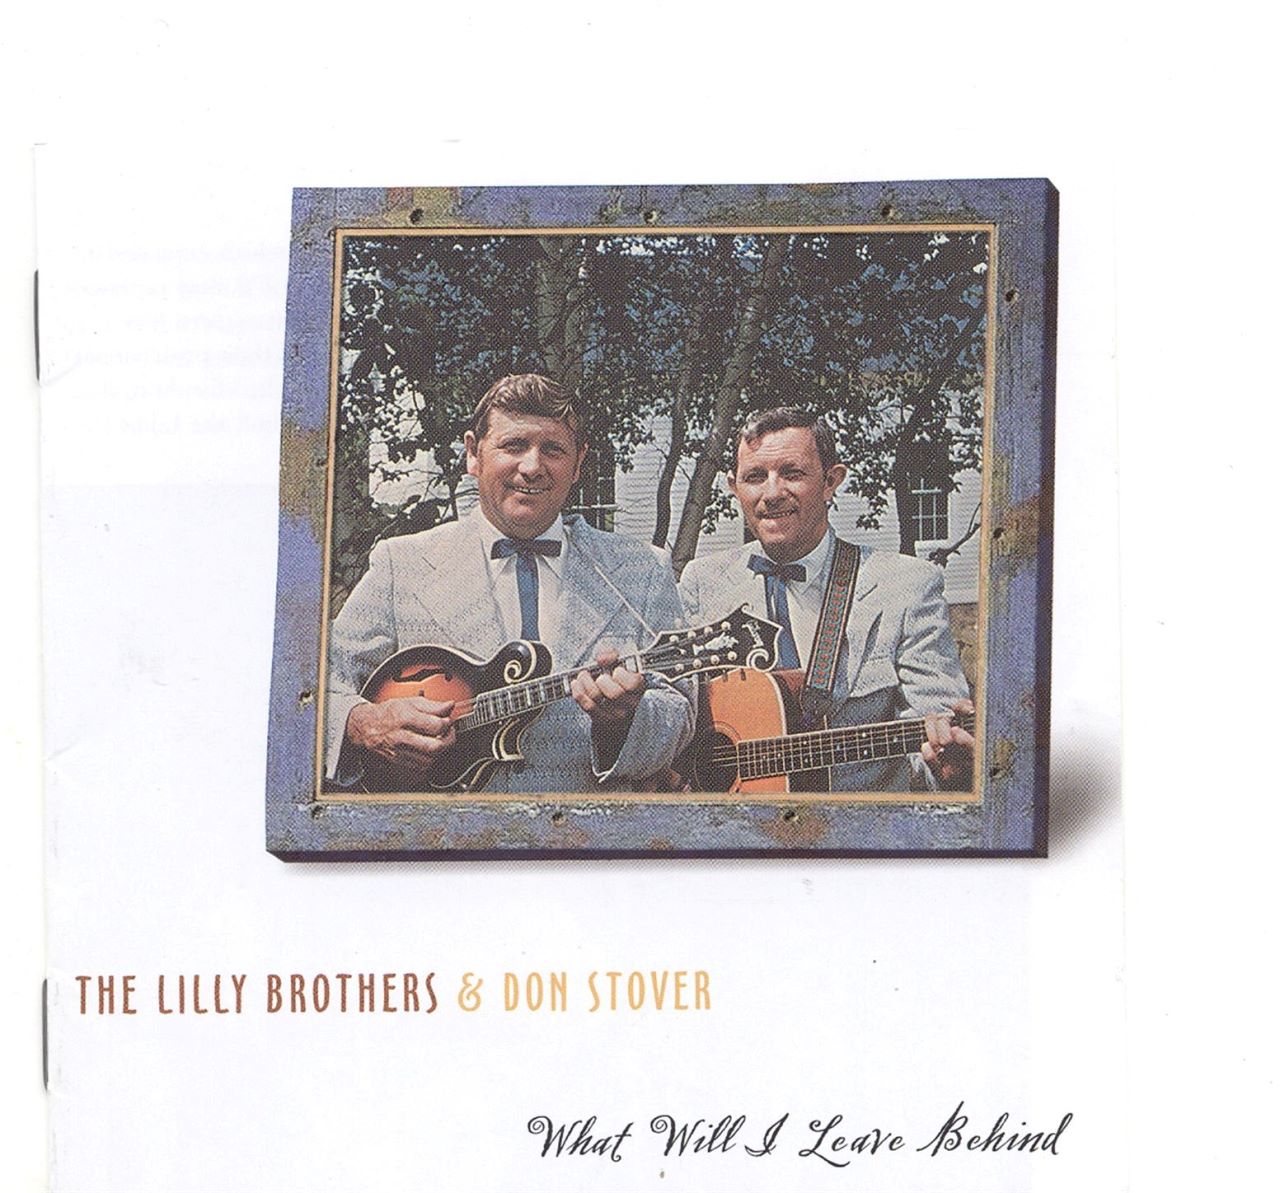 Lilly Brothers & Don Stover - What Will I Leave Behind cover album